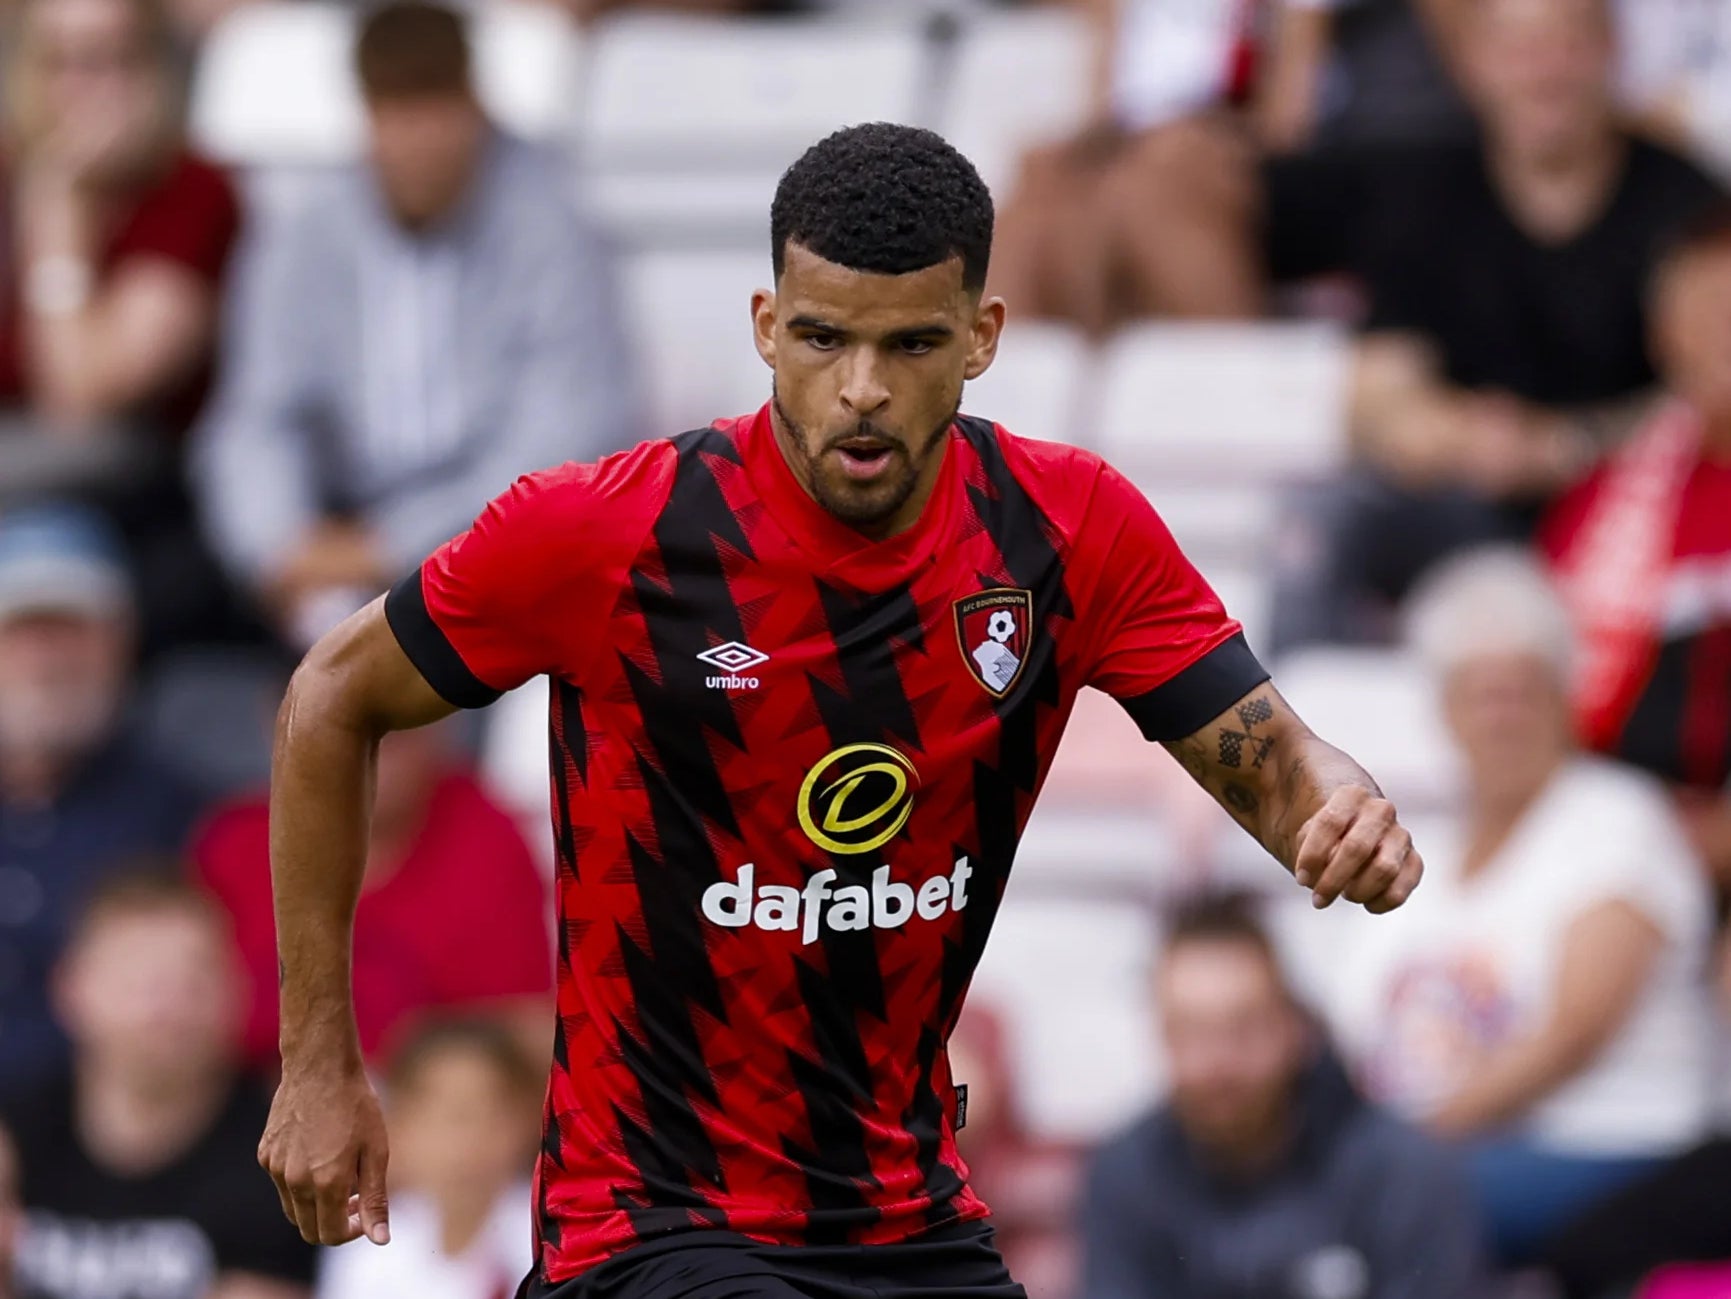 Bournemouth striker Dominic Solanke missed last weekend’s heavy loss at champions Manchester City